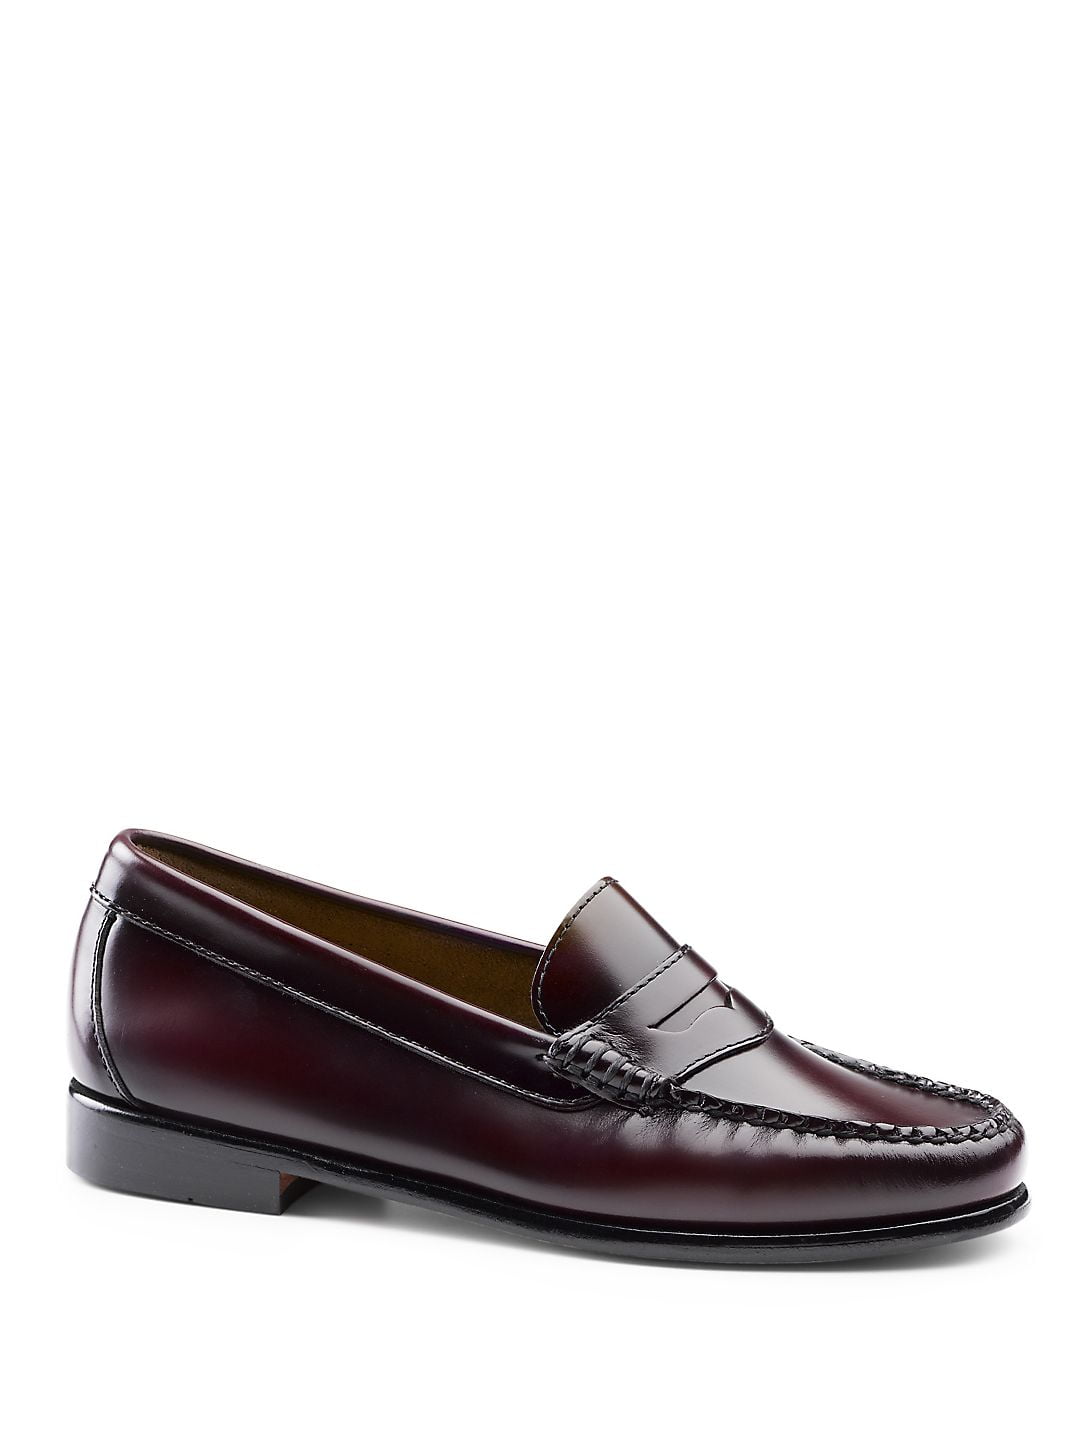 G.H. Bass - Whitney Weejuns Leather Penny Loafers - Walmart.com